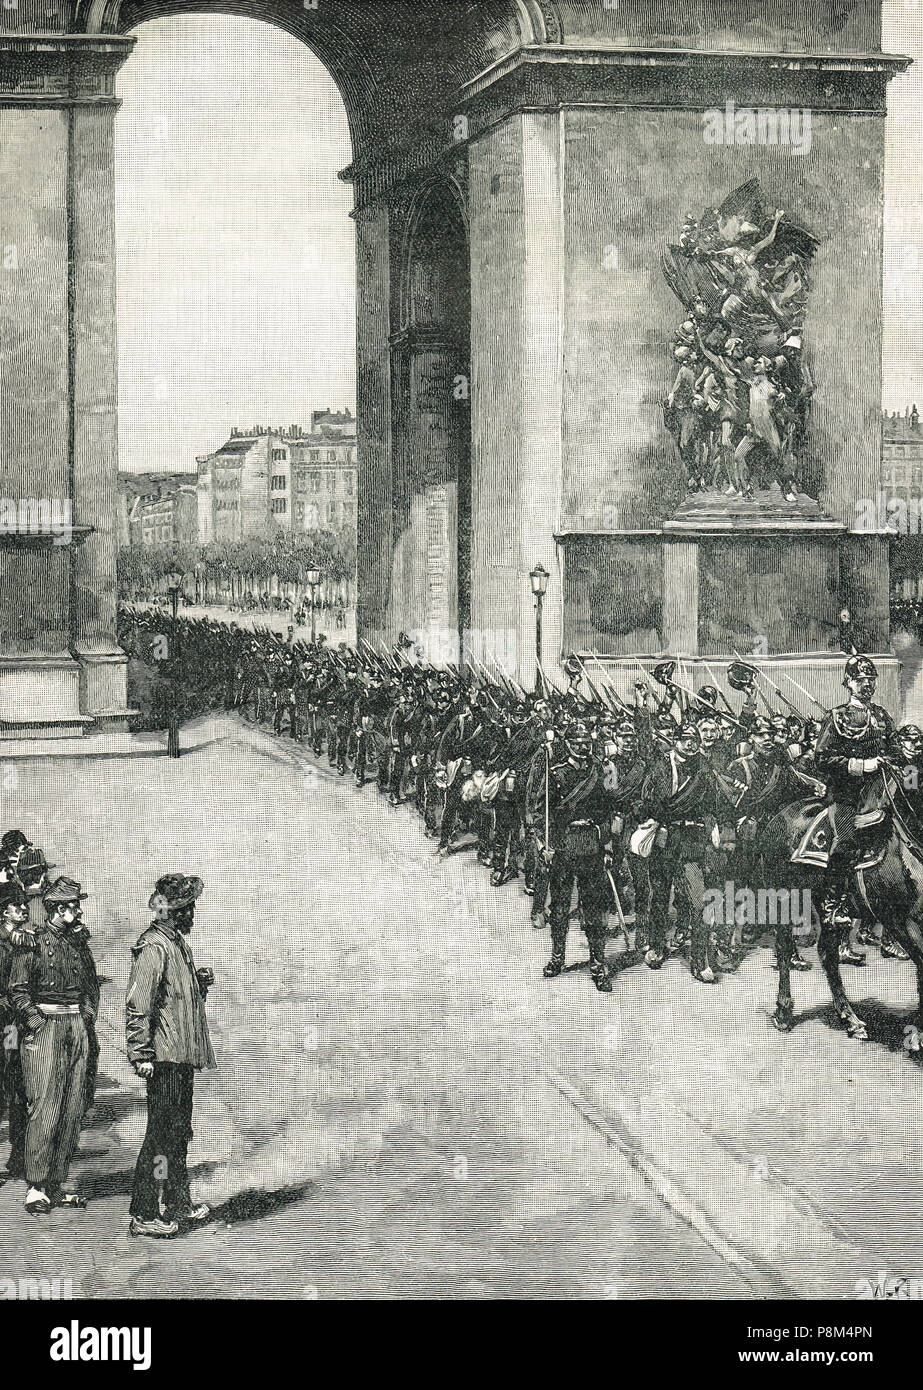 German Troops, Passing under the Arc de Triomphe, in Paris France, 1 March 1871, following Prussian victory in the Franco-Prussian War Stock Photo